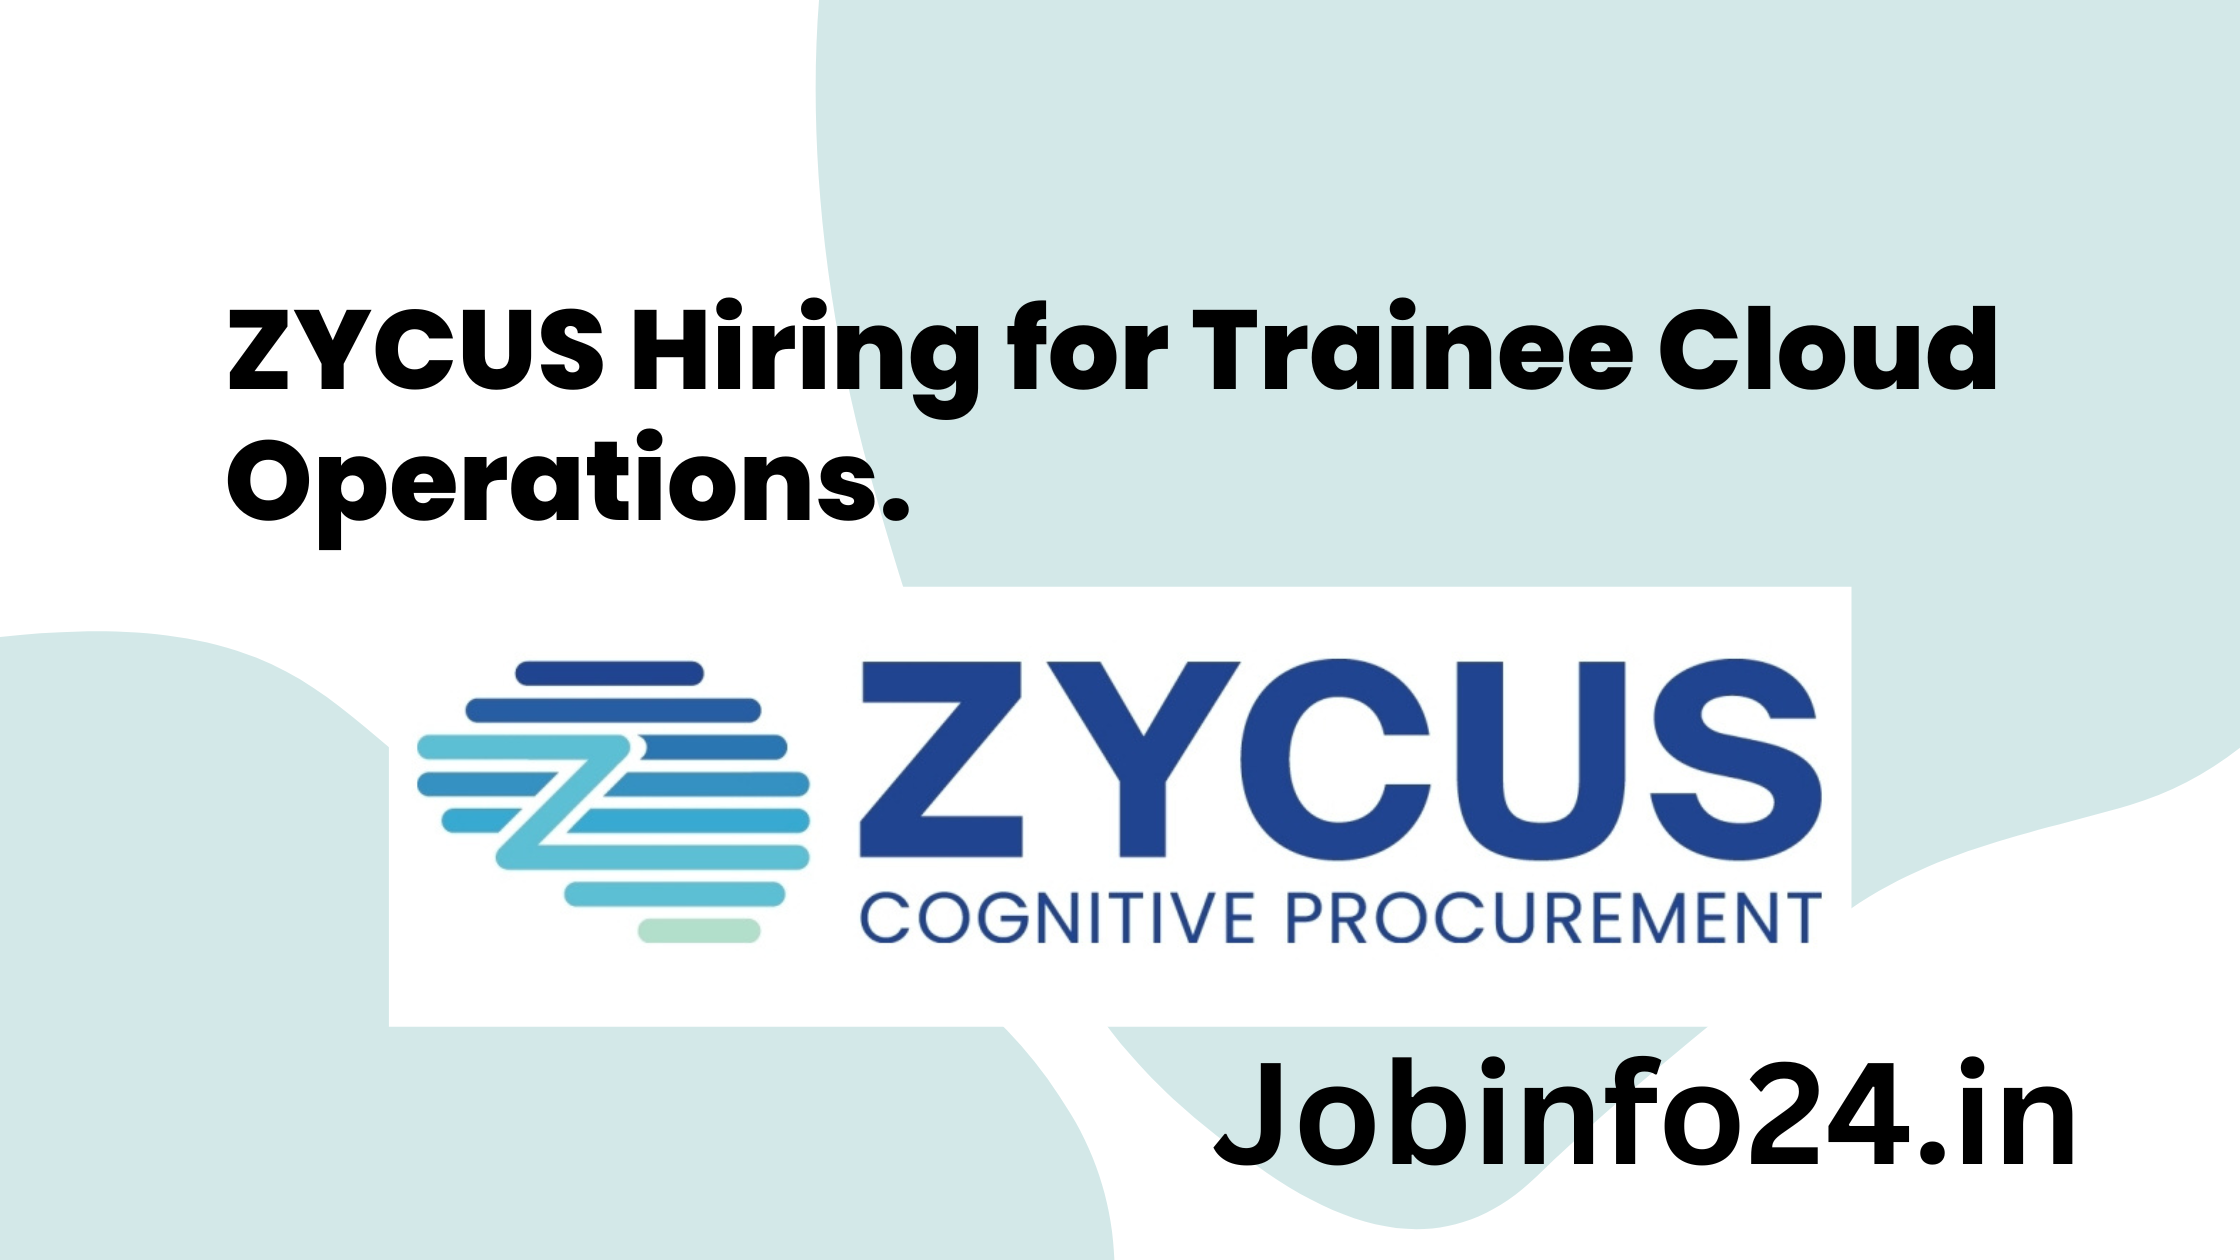 ZYCUS Hiring for Trainee Cloud Operations.